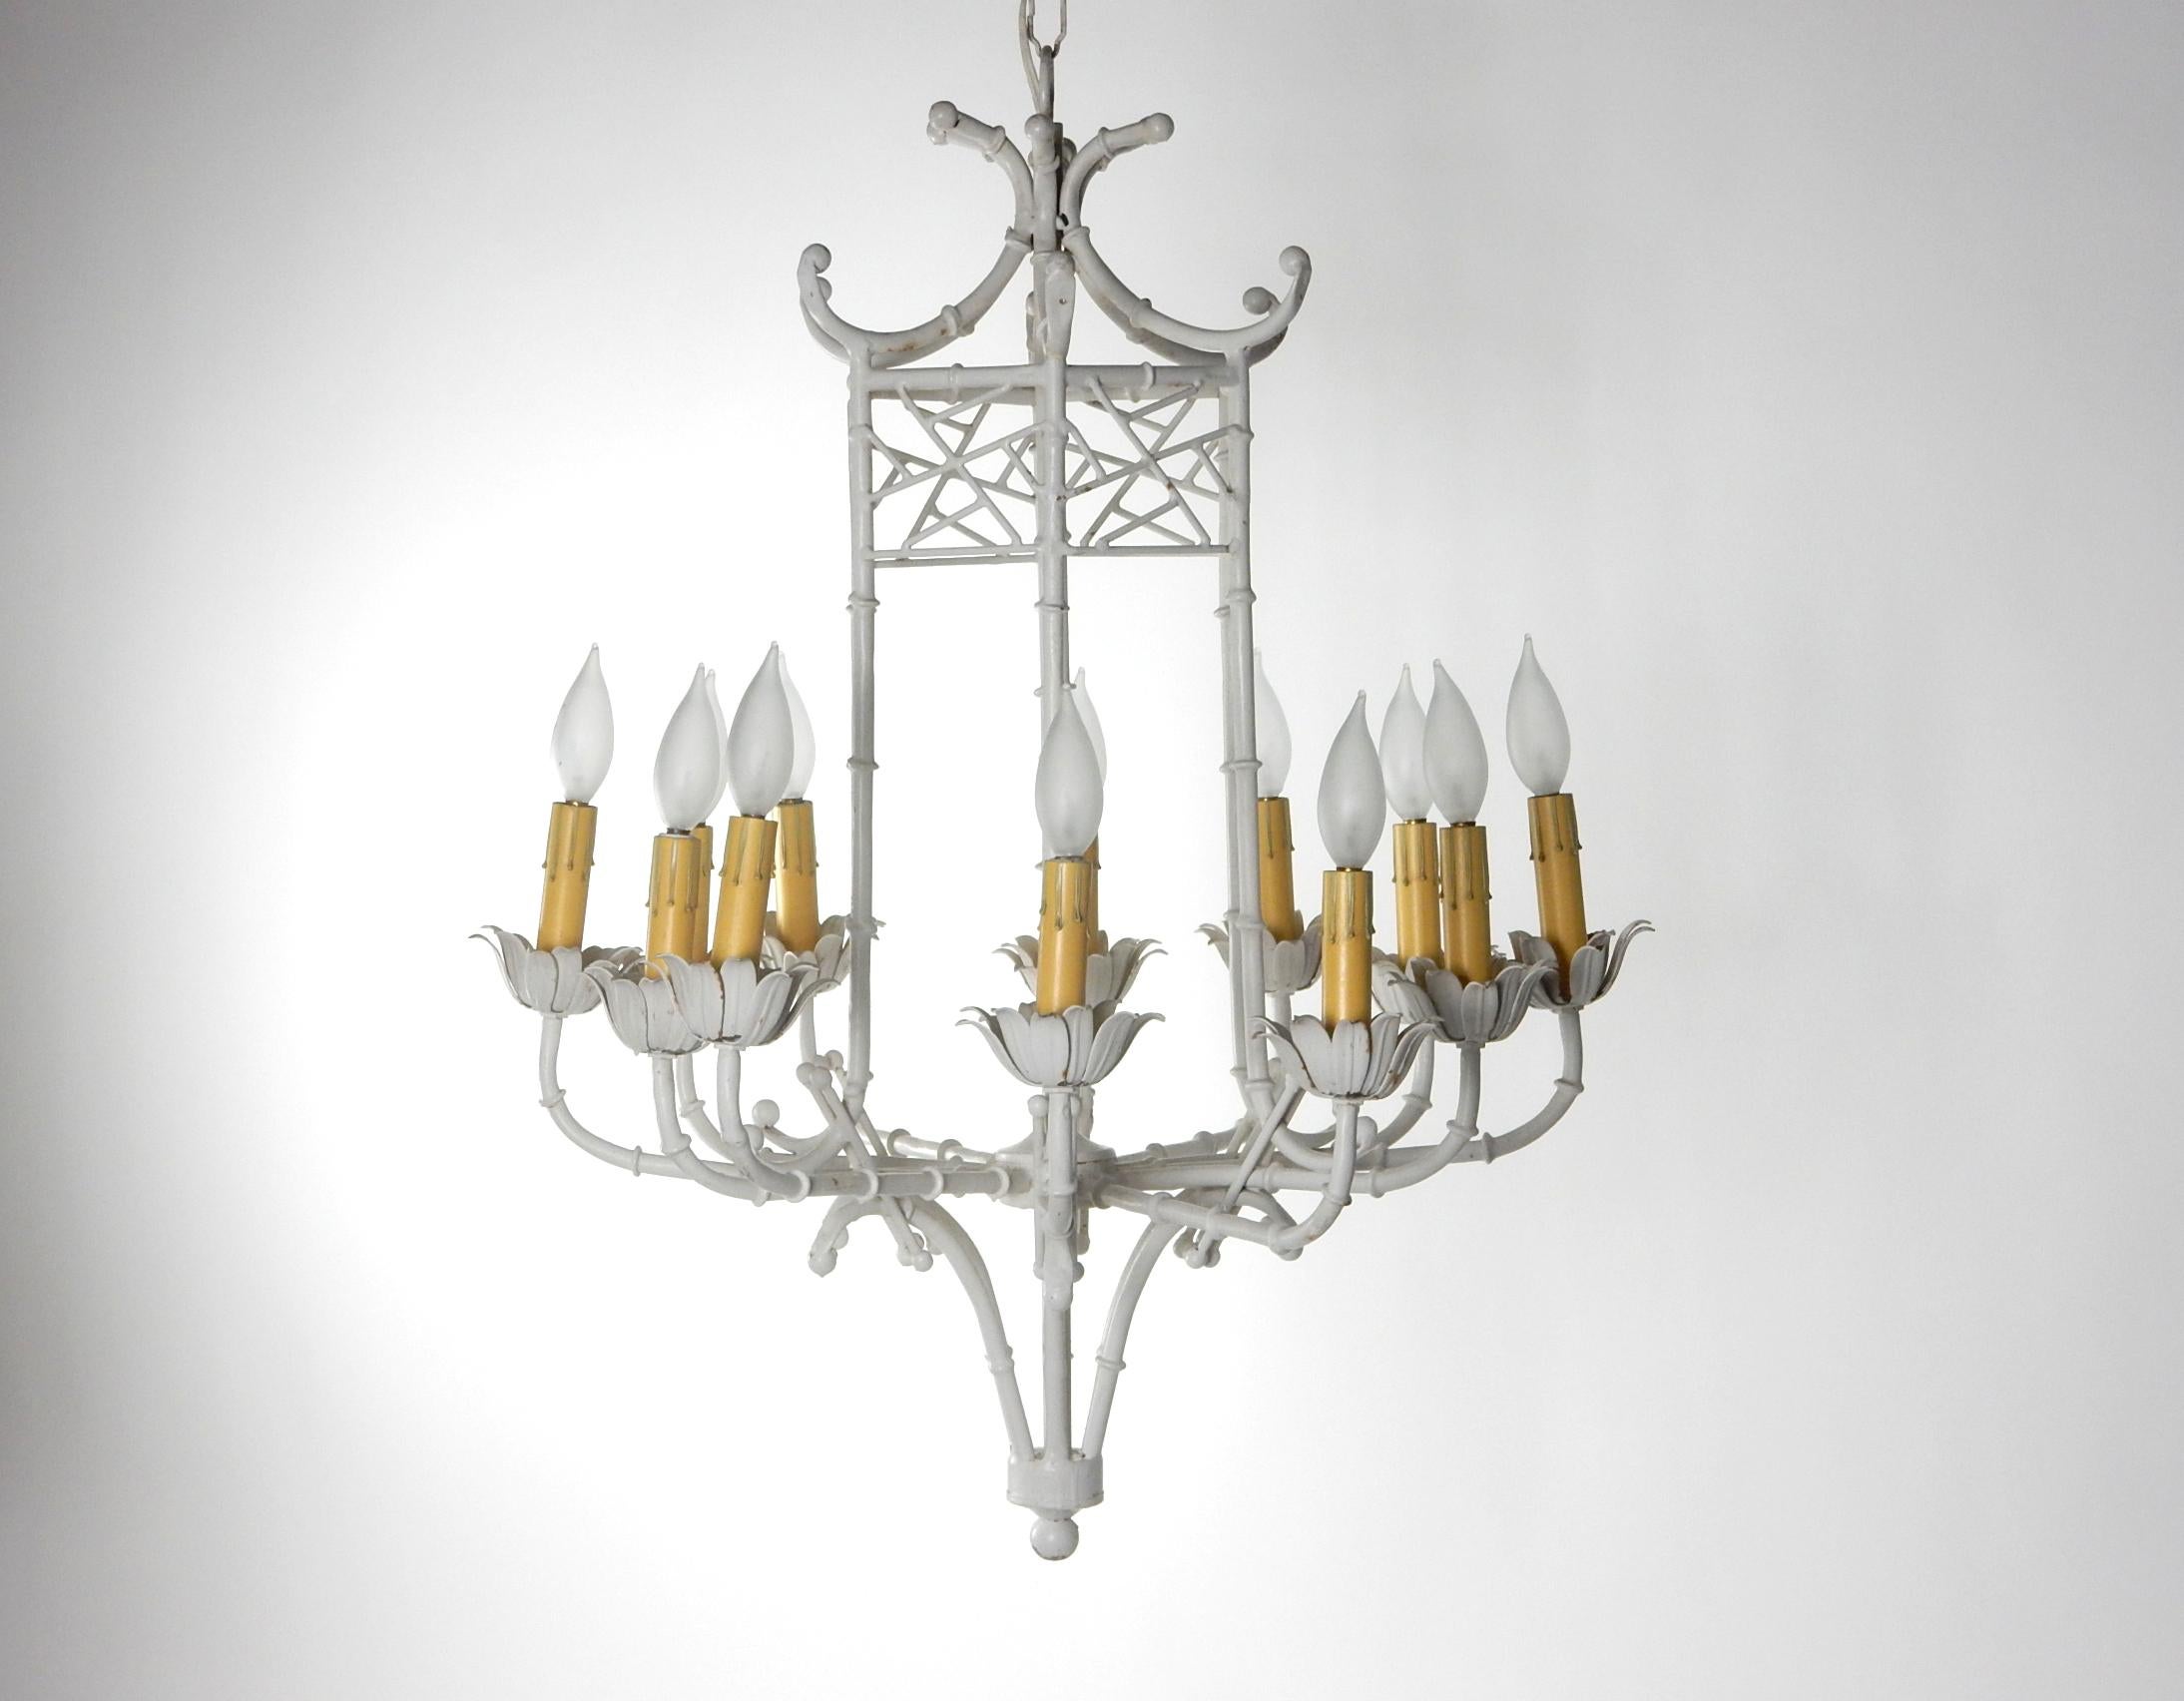 Fabulous 1960s faux bamboo pagoda chandelier.
12 bulbs. Creamy white enamel over metal construction.
Original realistic drip candle sleeves.
Measures: 32